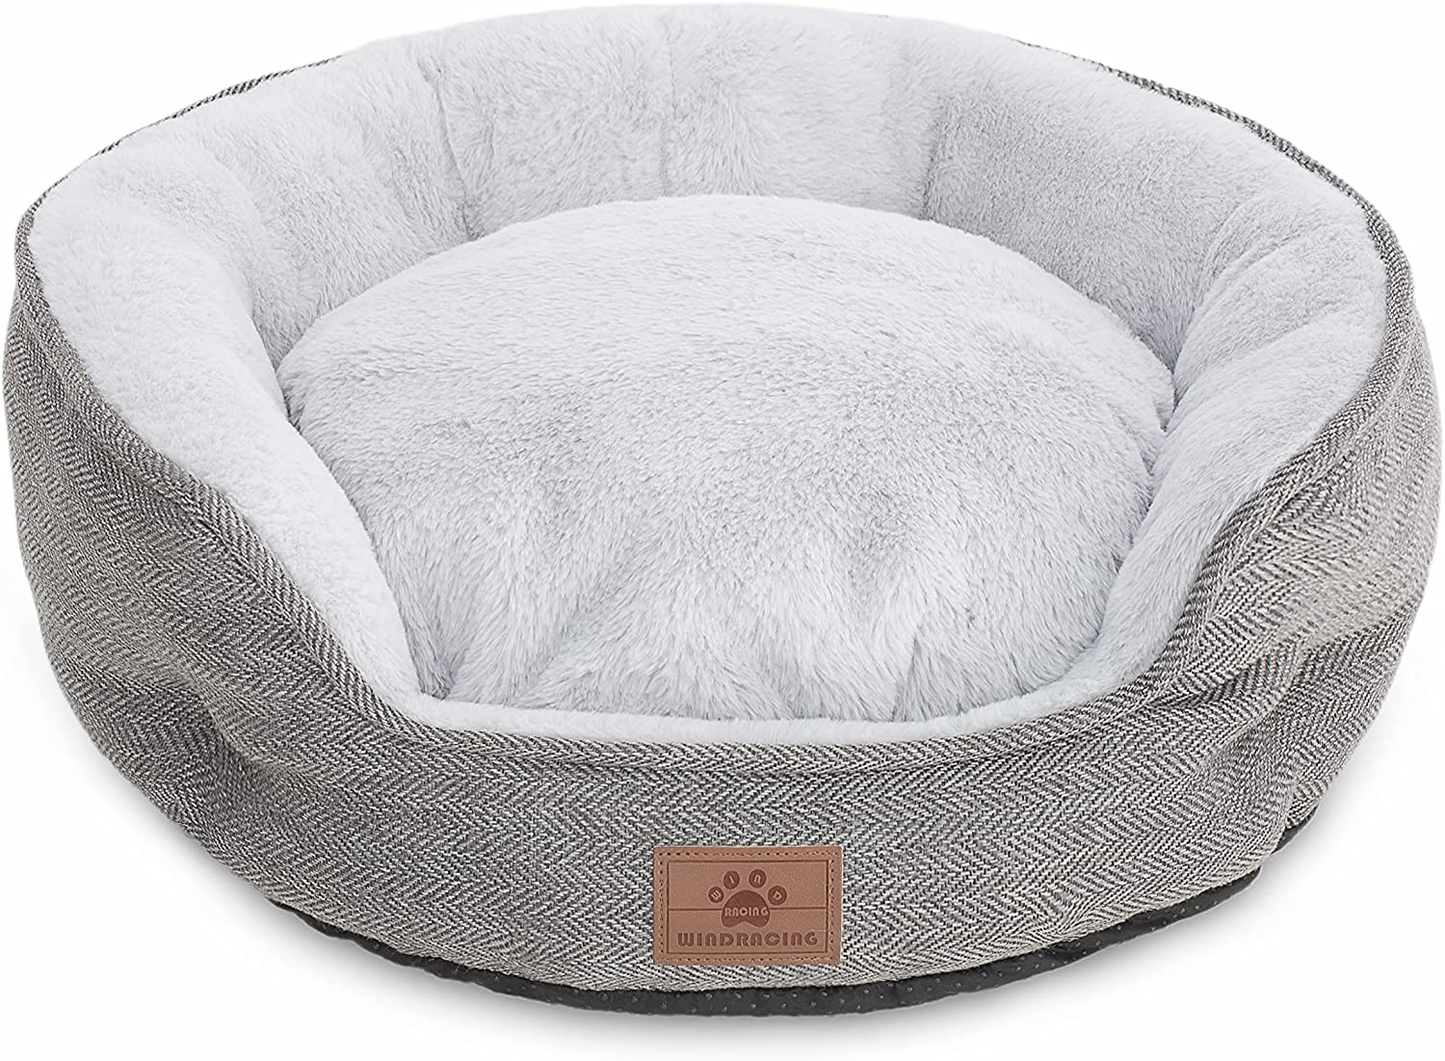 Cat Beds for Indoor Cats,Small Dog Bed,Cuddler Dog Beds,Calming Dog Bed Donut,Soft Anxiety Cozy Pet Beds,Puppy Bed for Small/Medium Dogs Washable round in Beige Color,Windracing PET